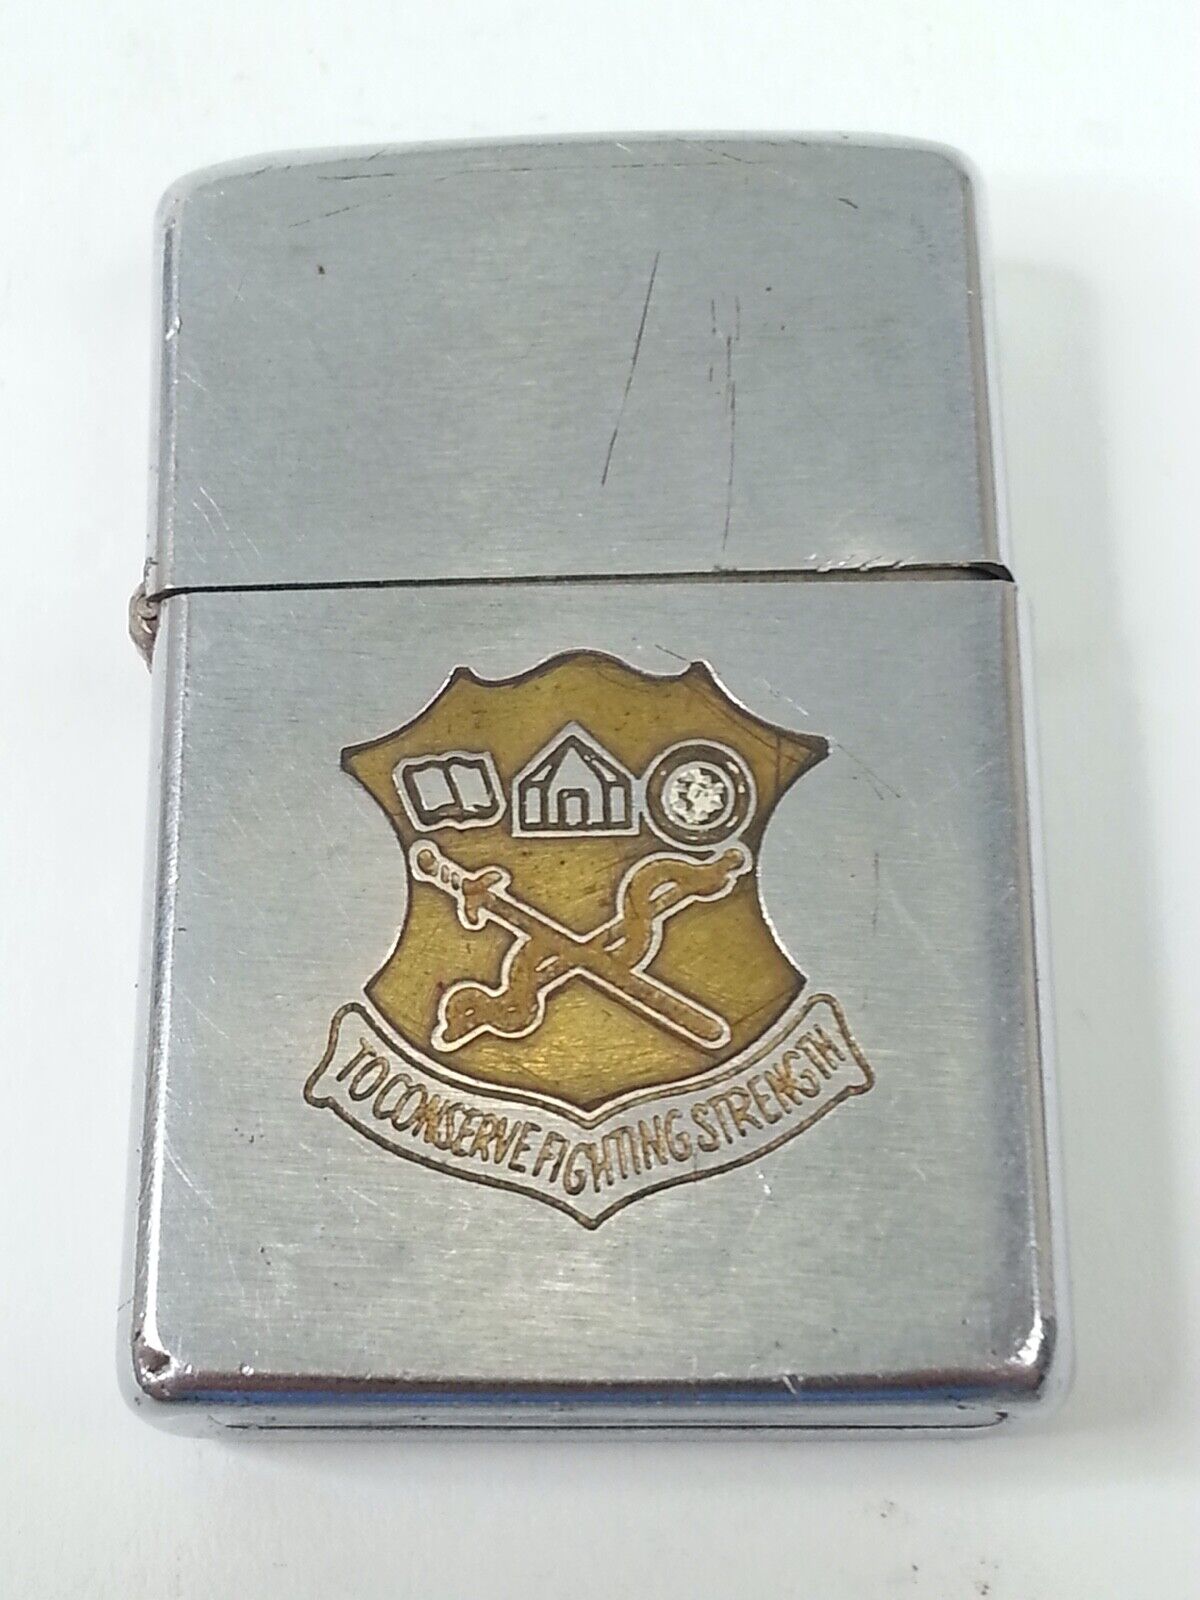 Vintage US ARMY Military ZIPPO Cigarette Lighter Academy Of Health Science Unit